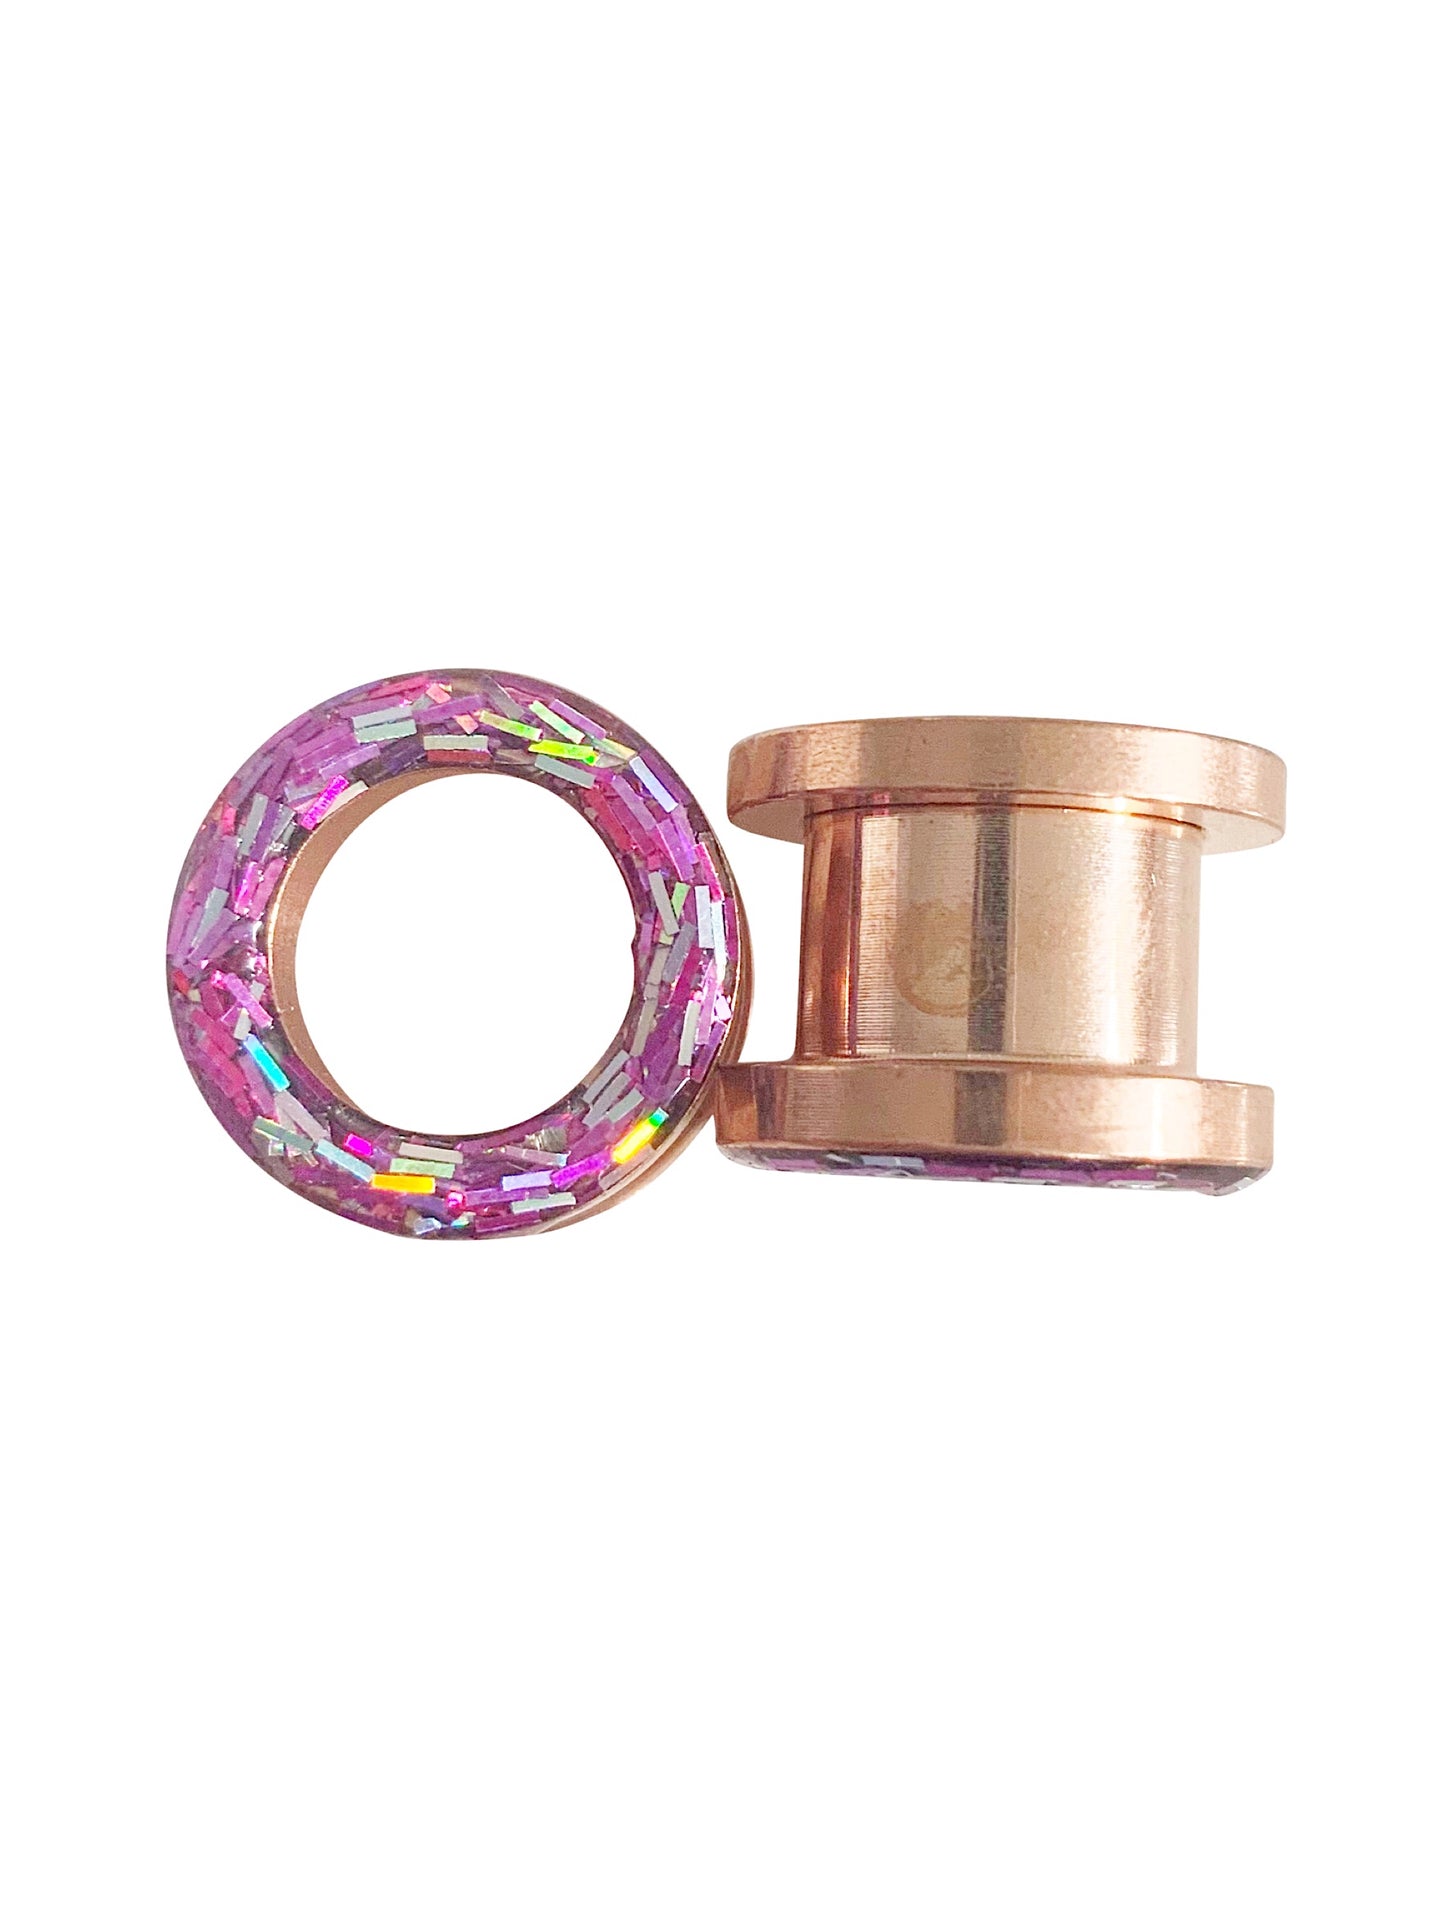 Tunnel Iridescent Confetti Collection 6 Set of Plugs